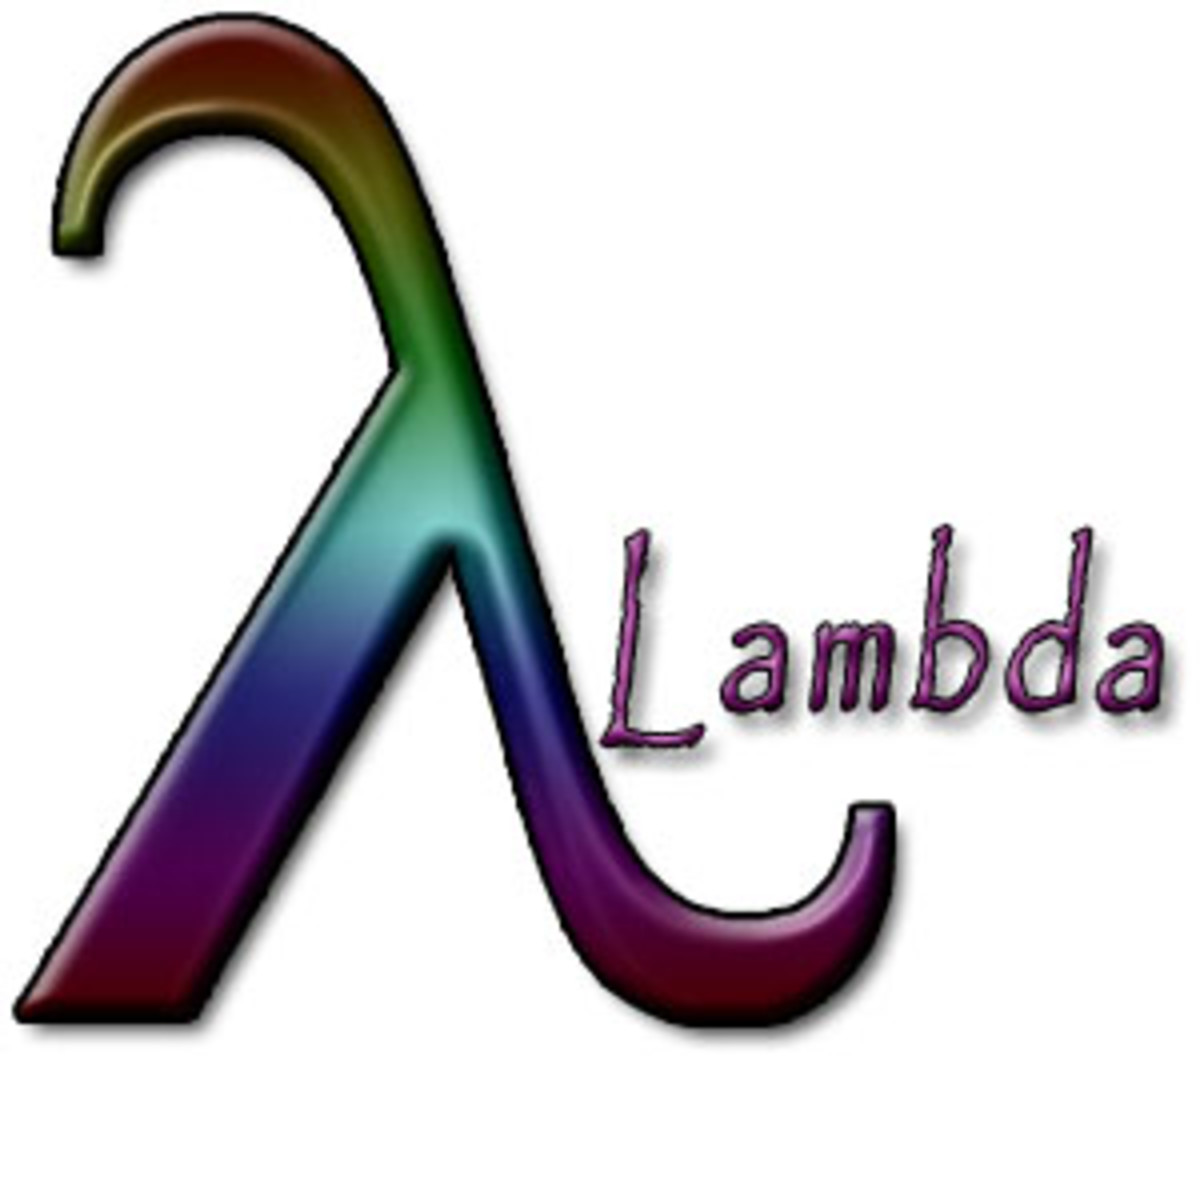 The 11th letter in the Greek alphabet is also a symbol for lesbians!